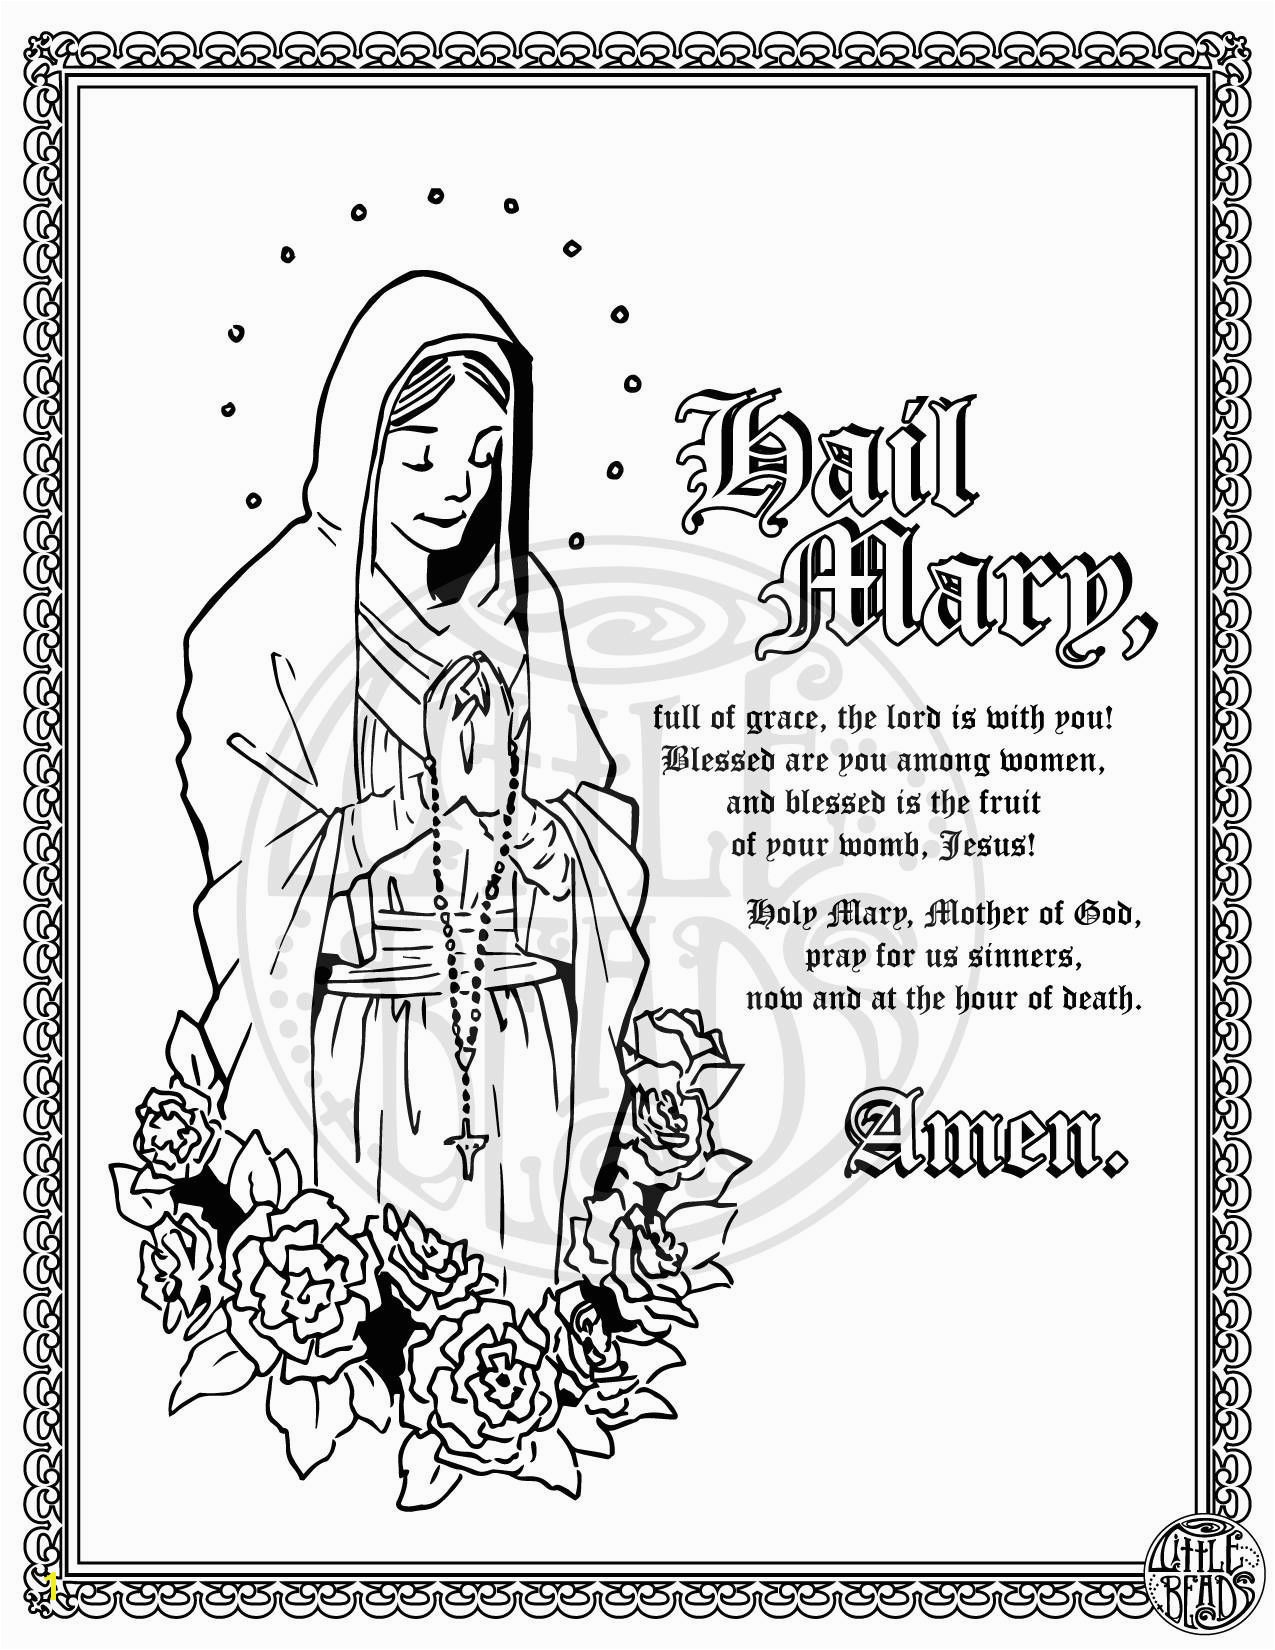 Blessed Mother Coloring Page Blessed Mother Coloring Page Luxury Hail Mary Coloring Page